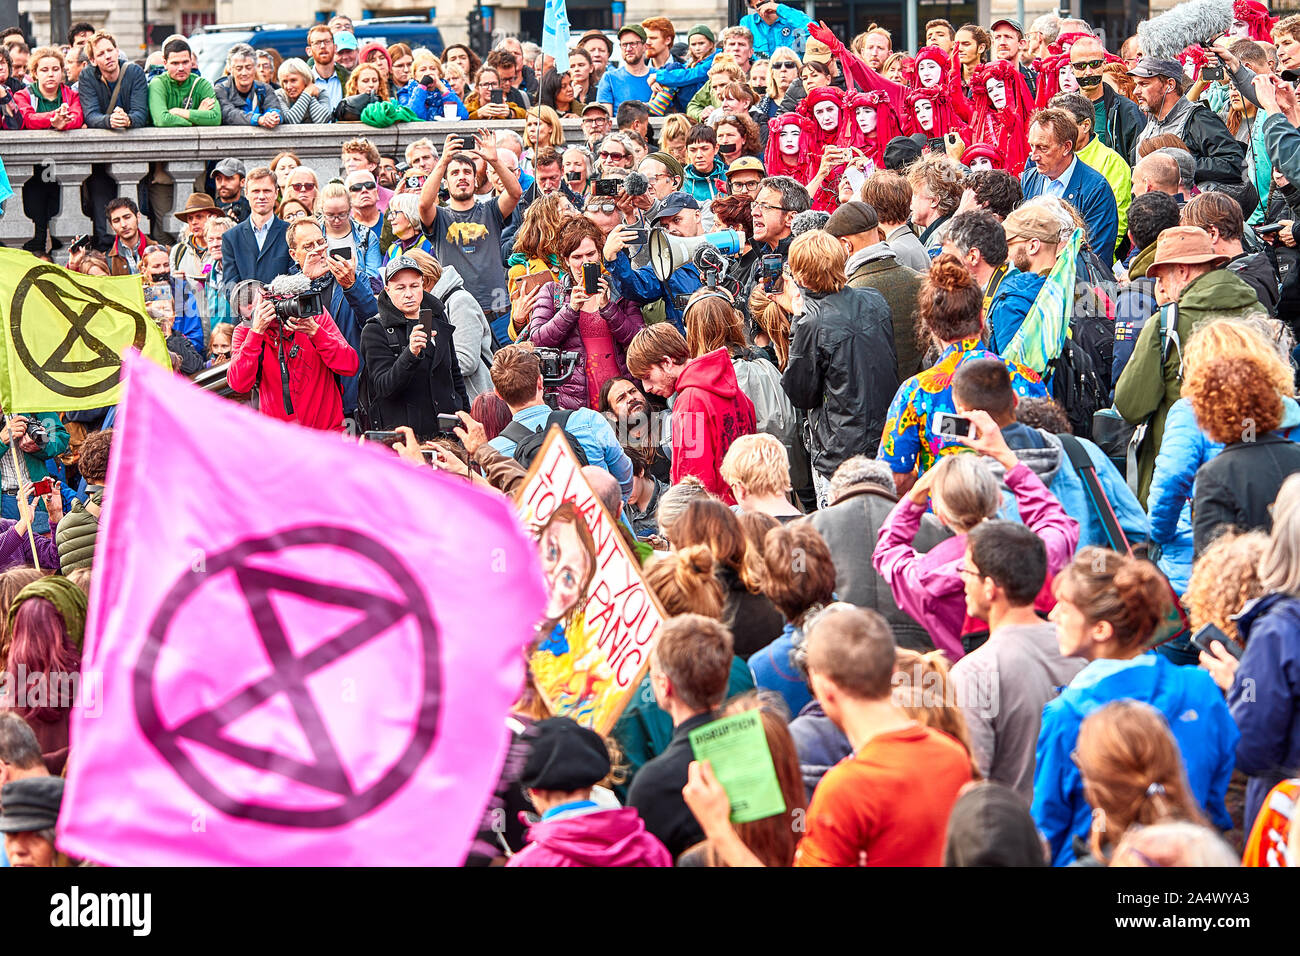 London, U.K. - Oct 16, 2019: Environmental campaigner George Monbiot (centre with megaphone) addresses a crowd of Extinction Rebellion supporters in Trafalgar Square. Stock Photo